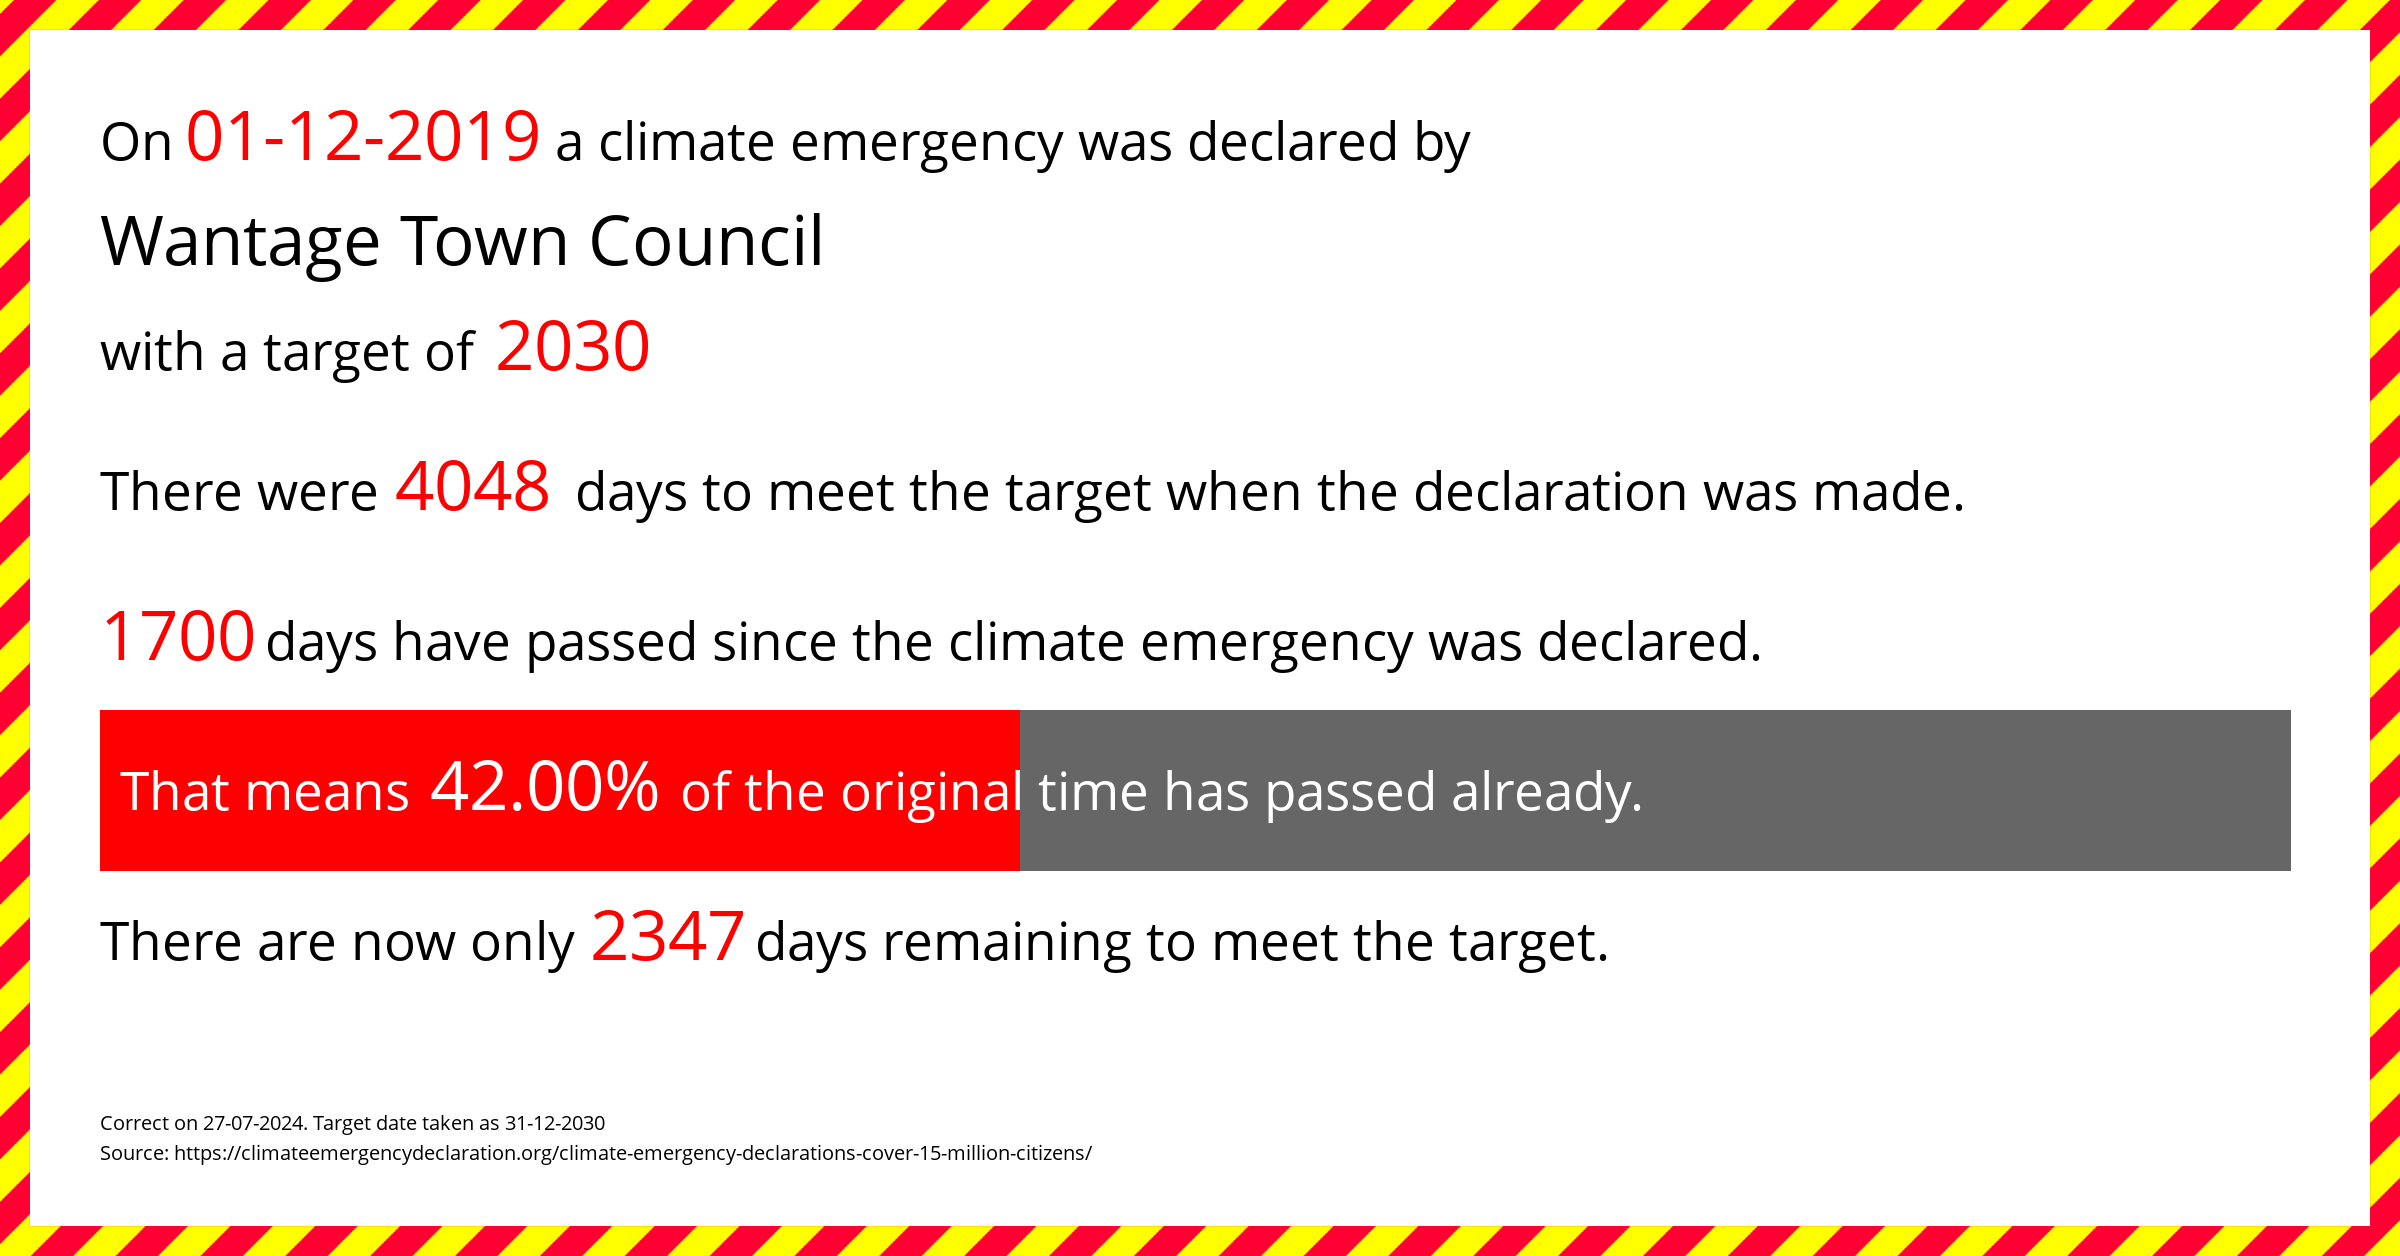 Wantage Town Council declared a Climate emergency on Sunday 1st December 2019, with a target of 2030.